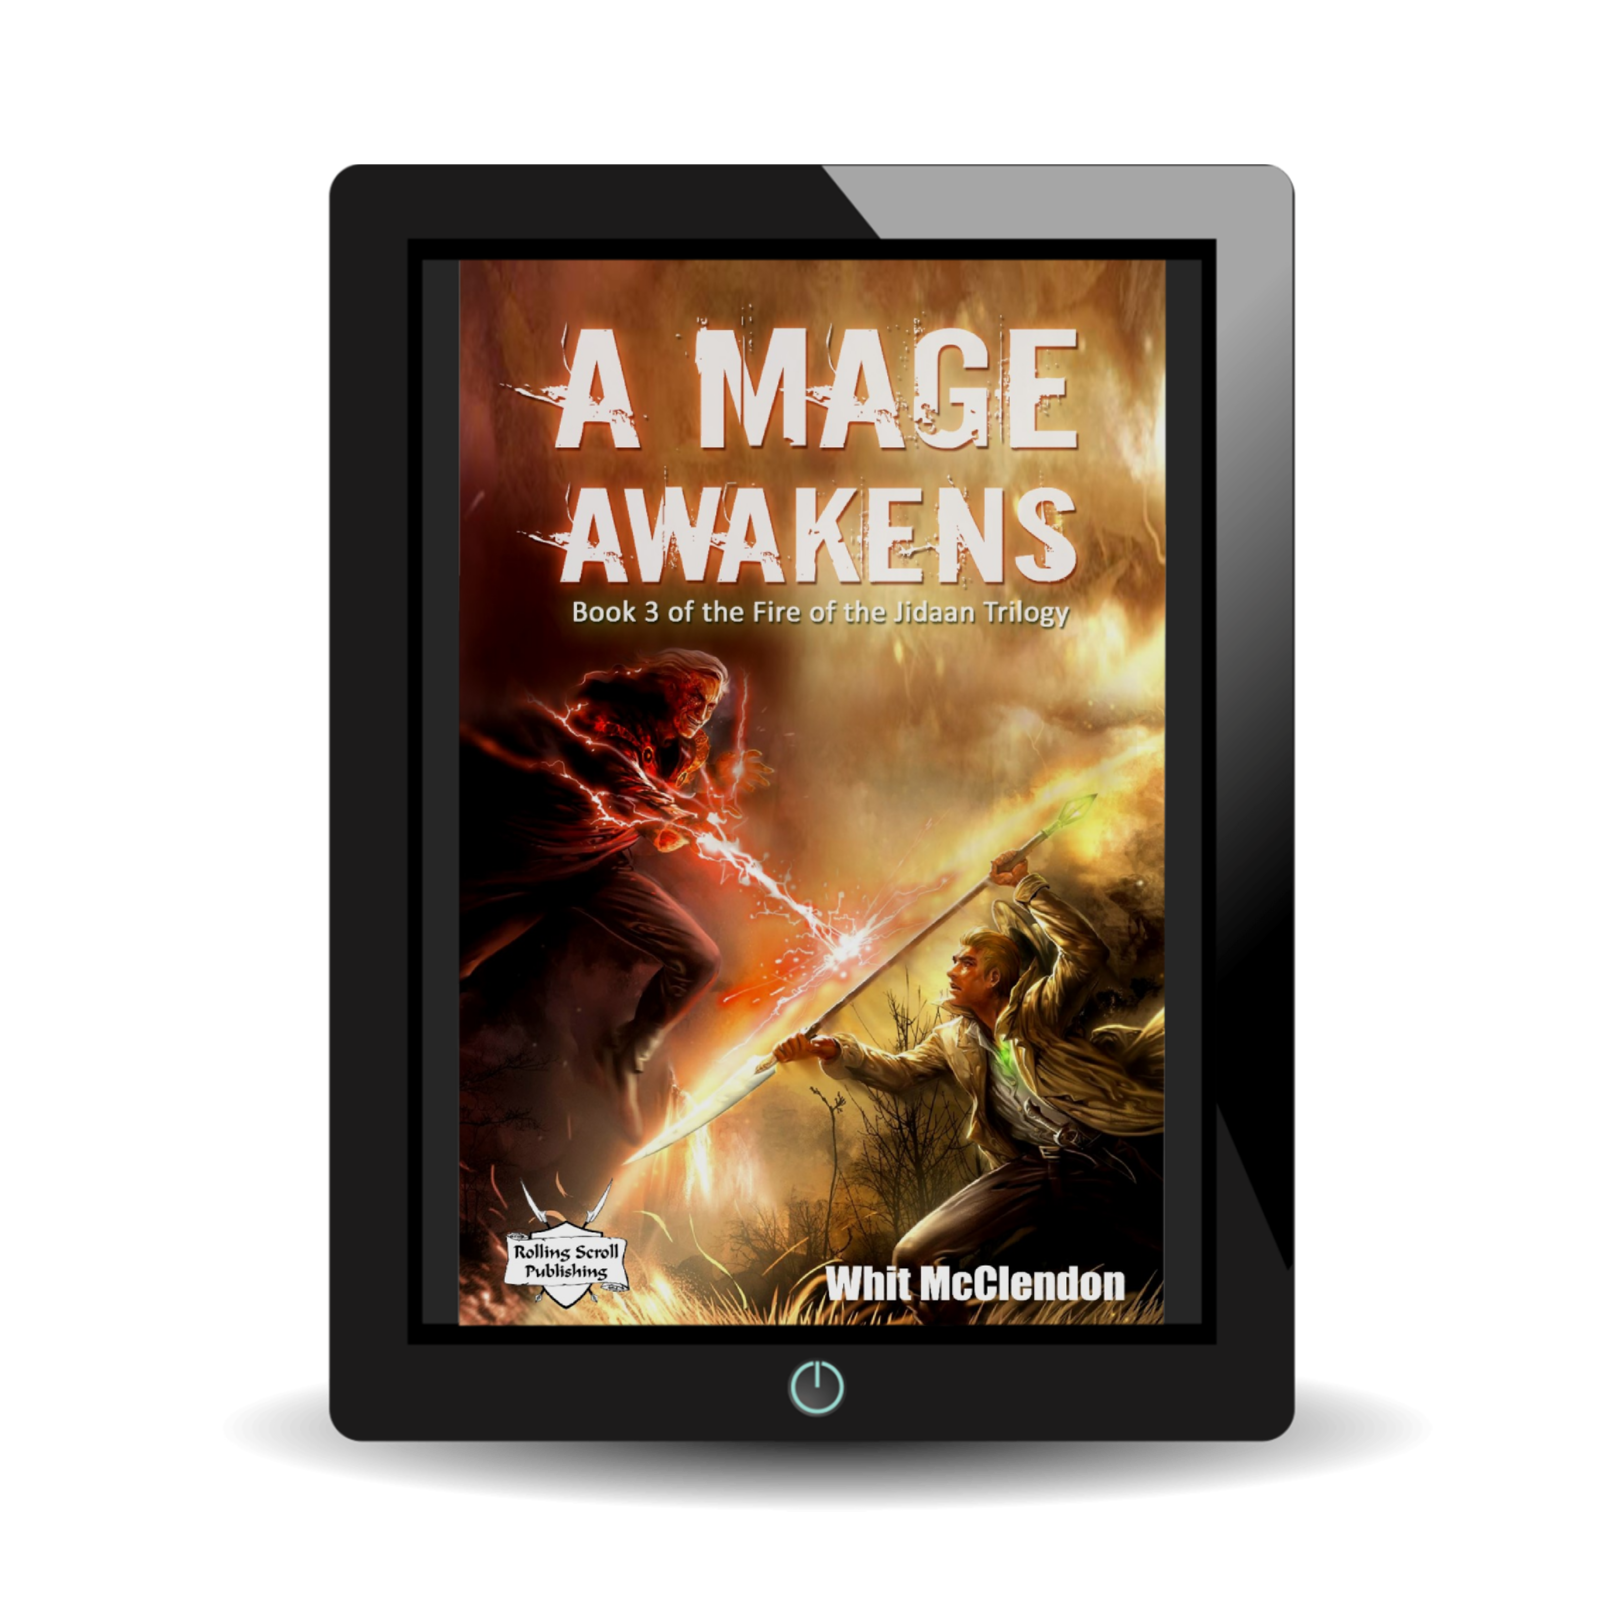 A Mage Awakens: Book 3 of the Fire of the Jidaan Trilogy - EBOOK